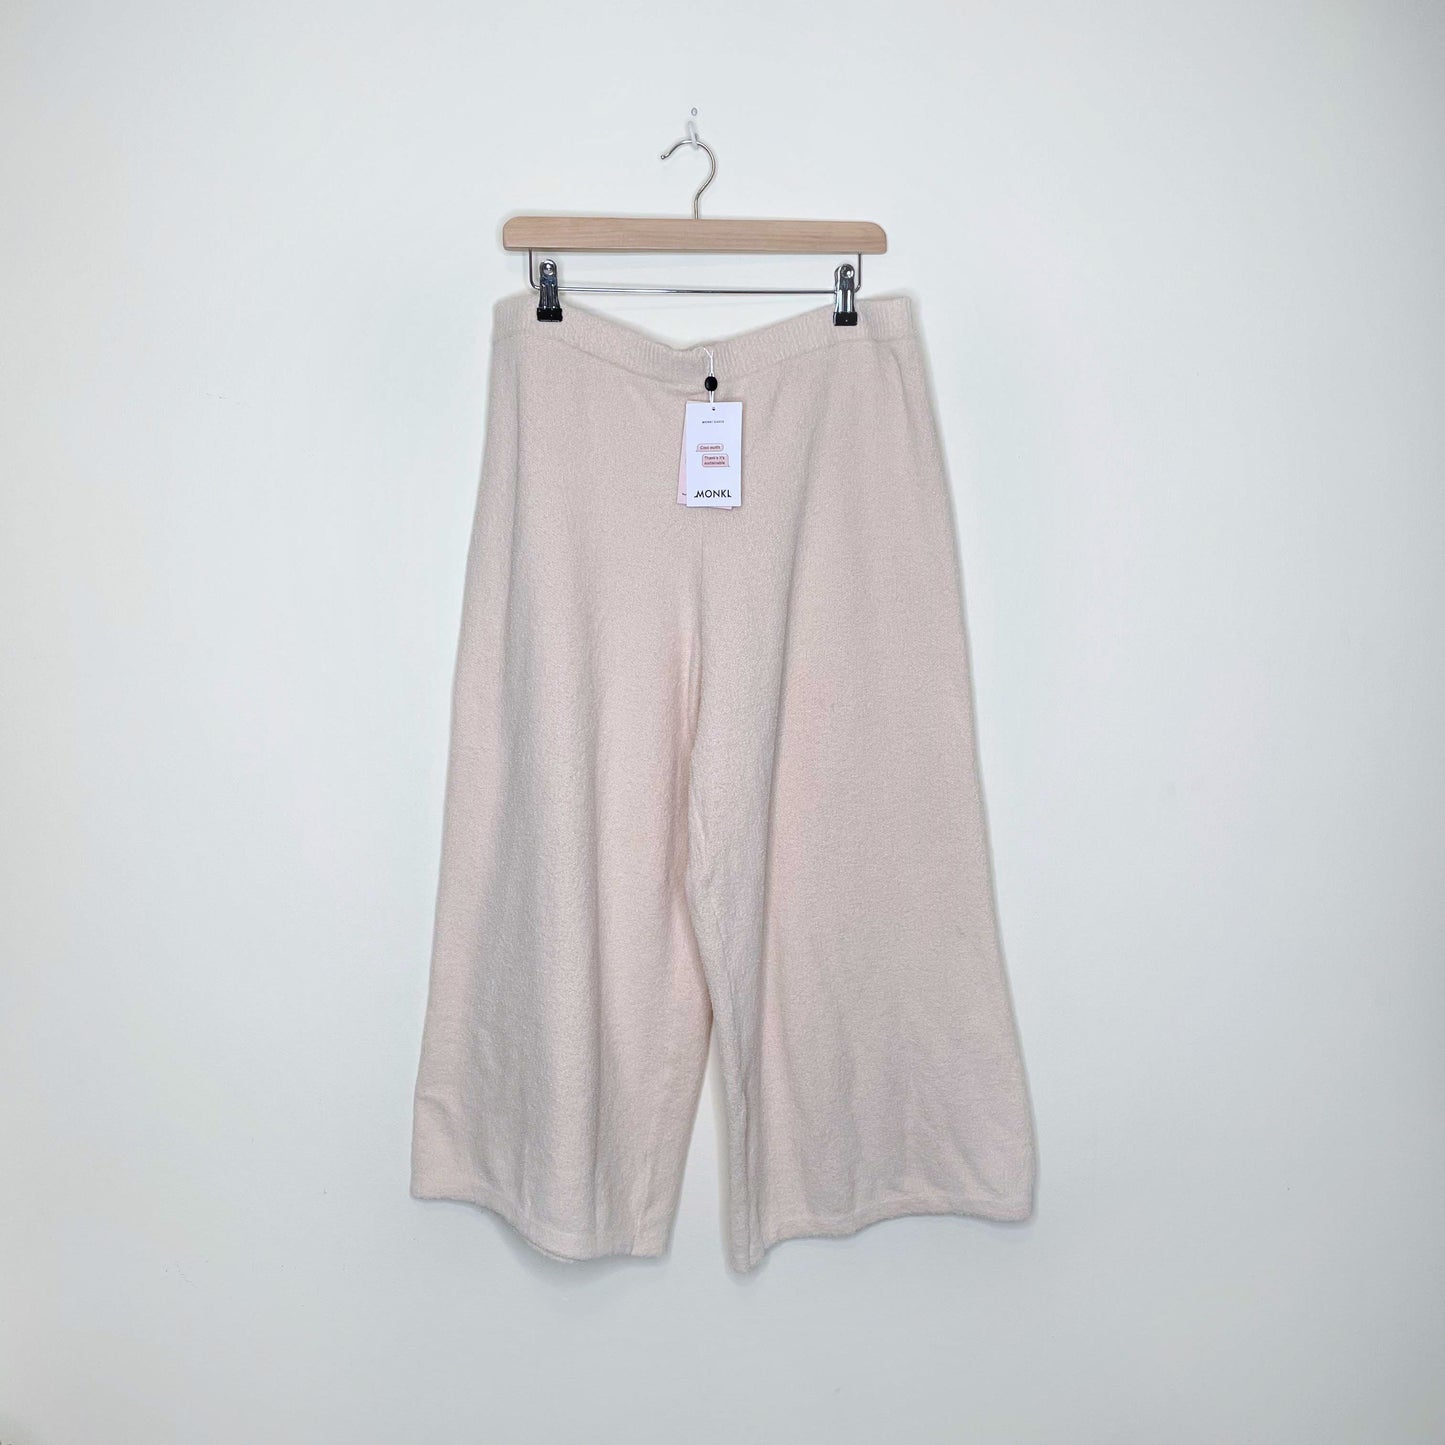 nwt monki calah fuzzy knitted wide leg pants - size large